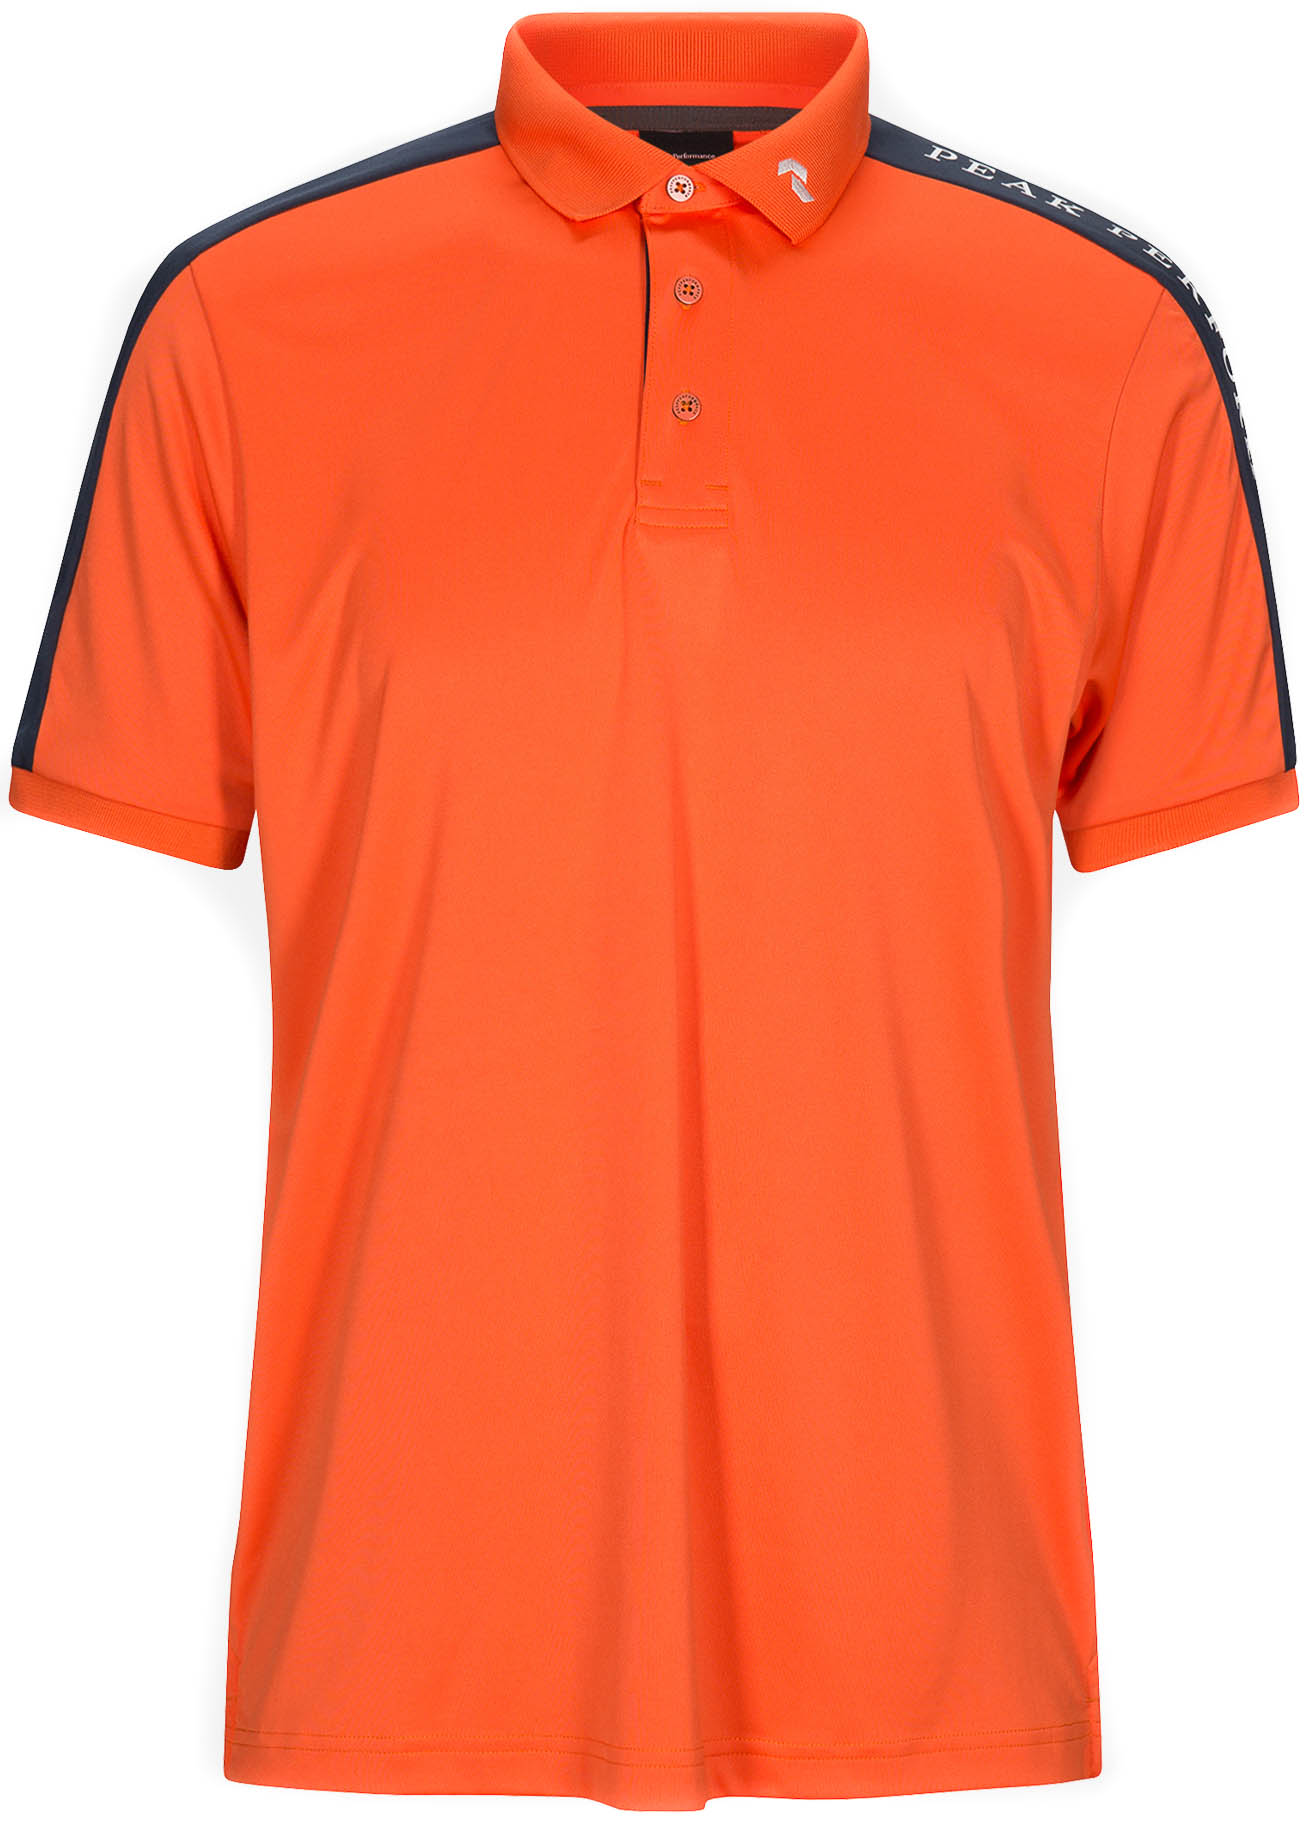 PeakPerformance Player Polo, aglow/blue shadow